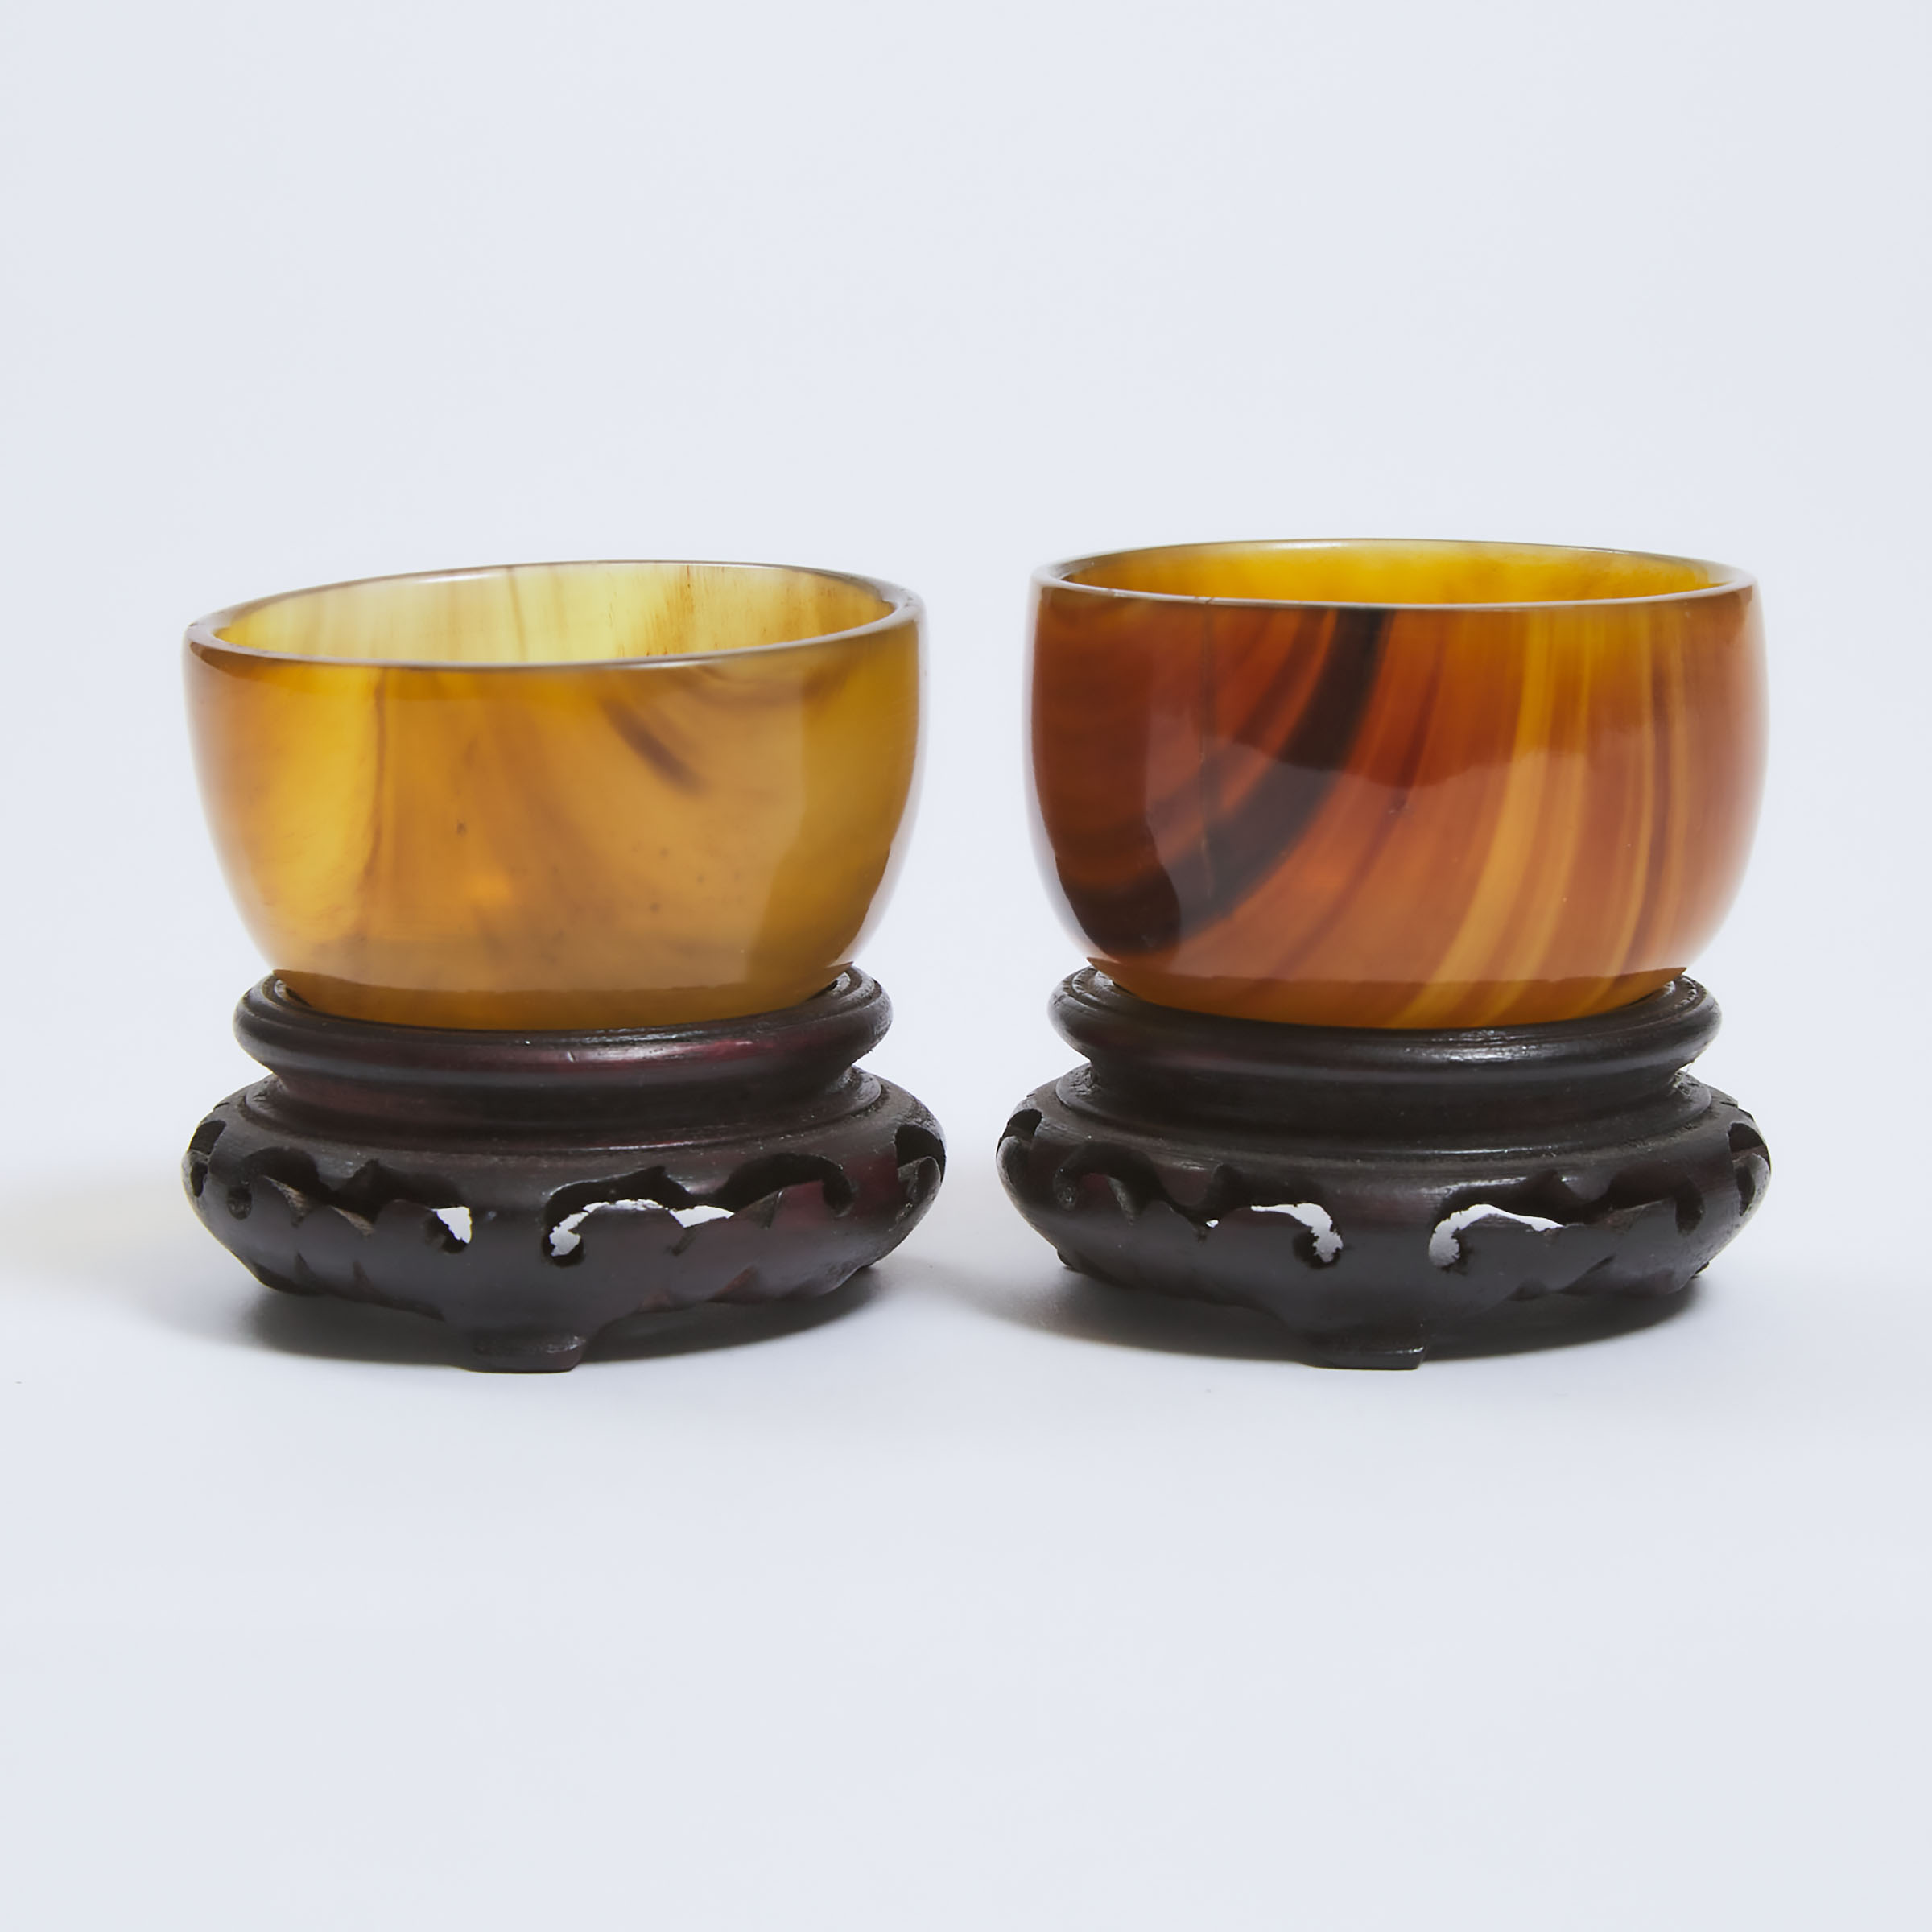 A Pair of Horn Cups, Early to Mid 20th Century